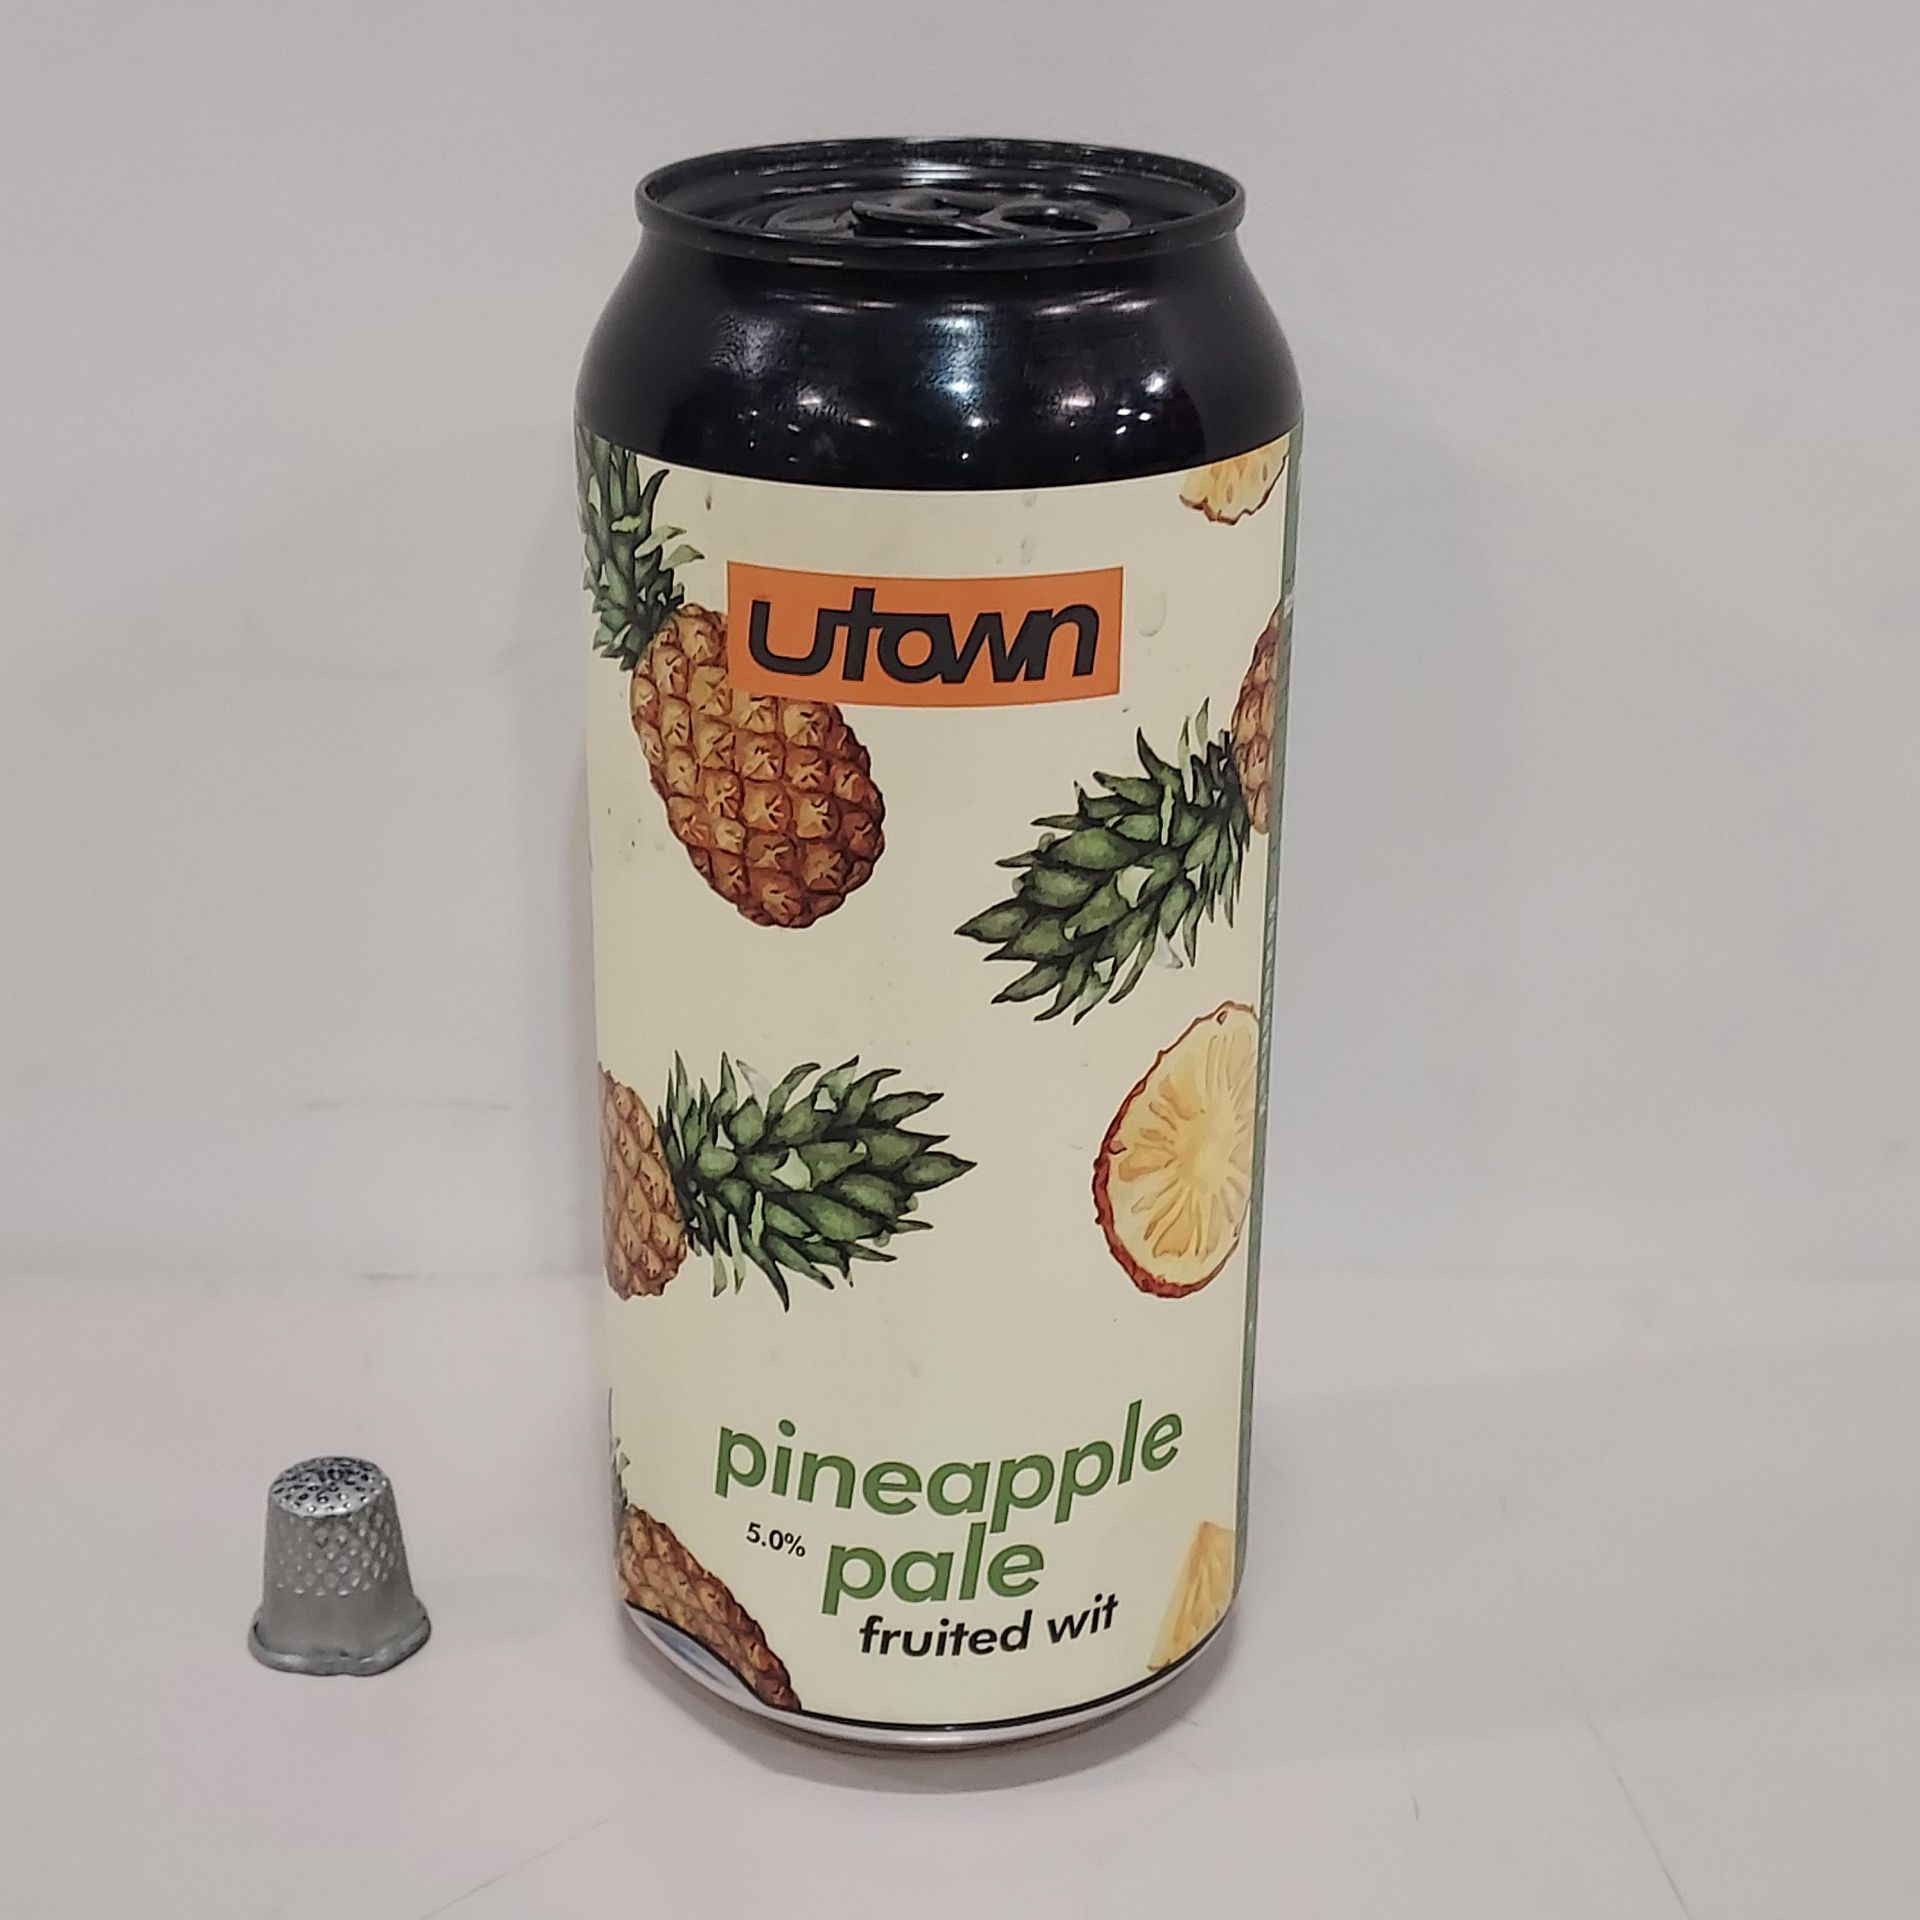 120 X BRAND NEW 440ML CANS OF UTOWN PINEAPPLE PALE FRUITED WIT BEER 5.0% ALCOHOL IN 5 BOXES (BBE APR